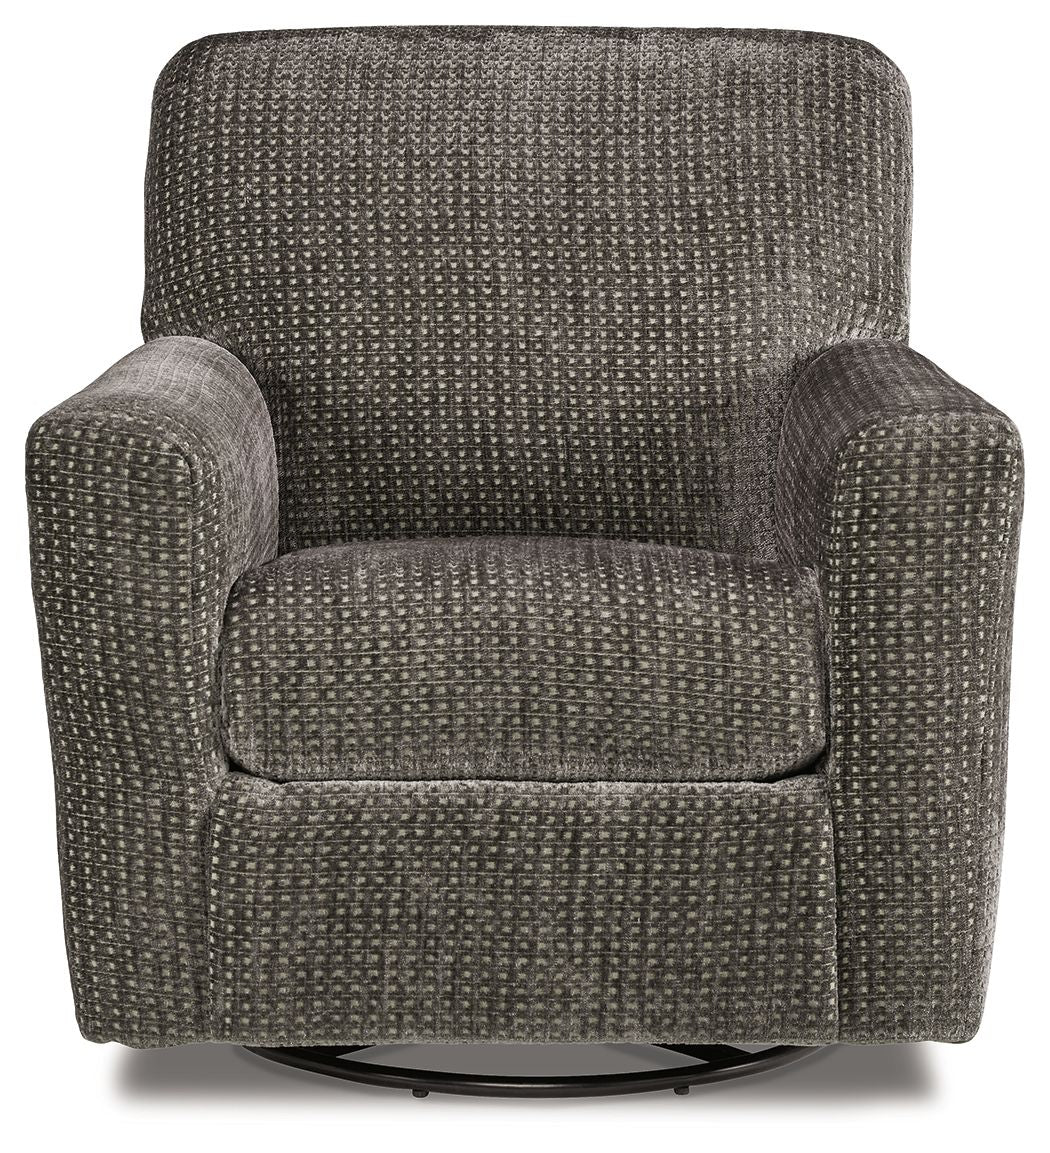 Herstow - Swivel Glider Accent Chair - Tony's Home Furnishings